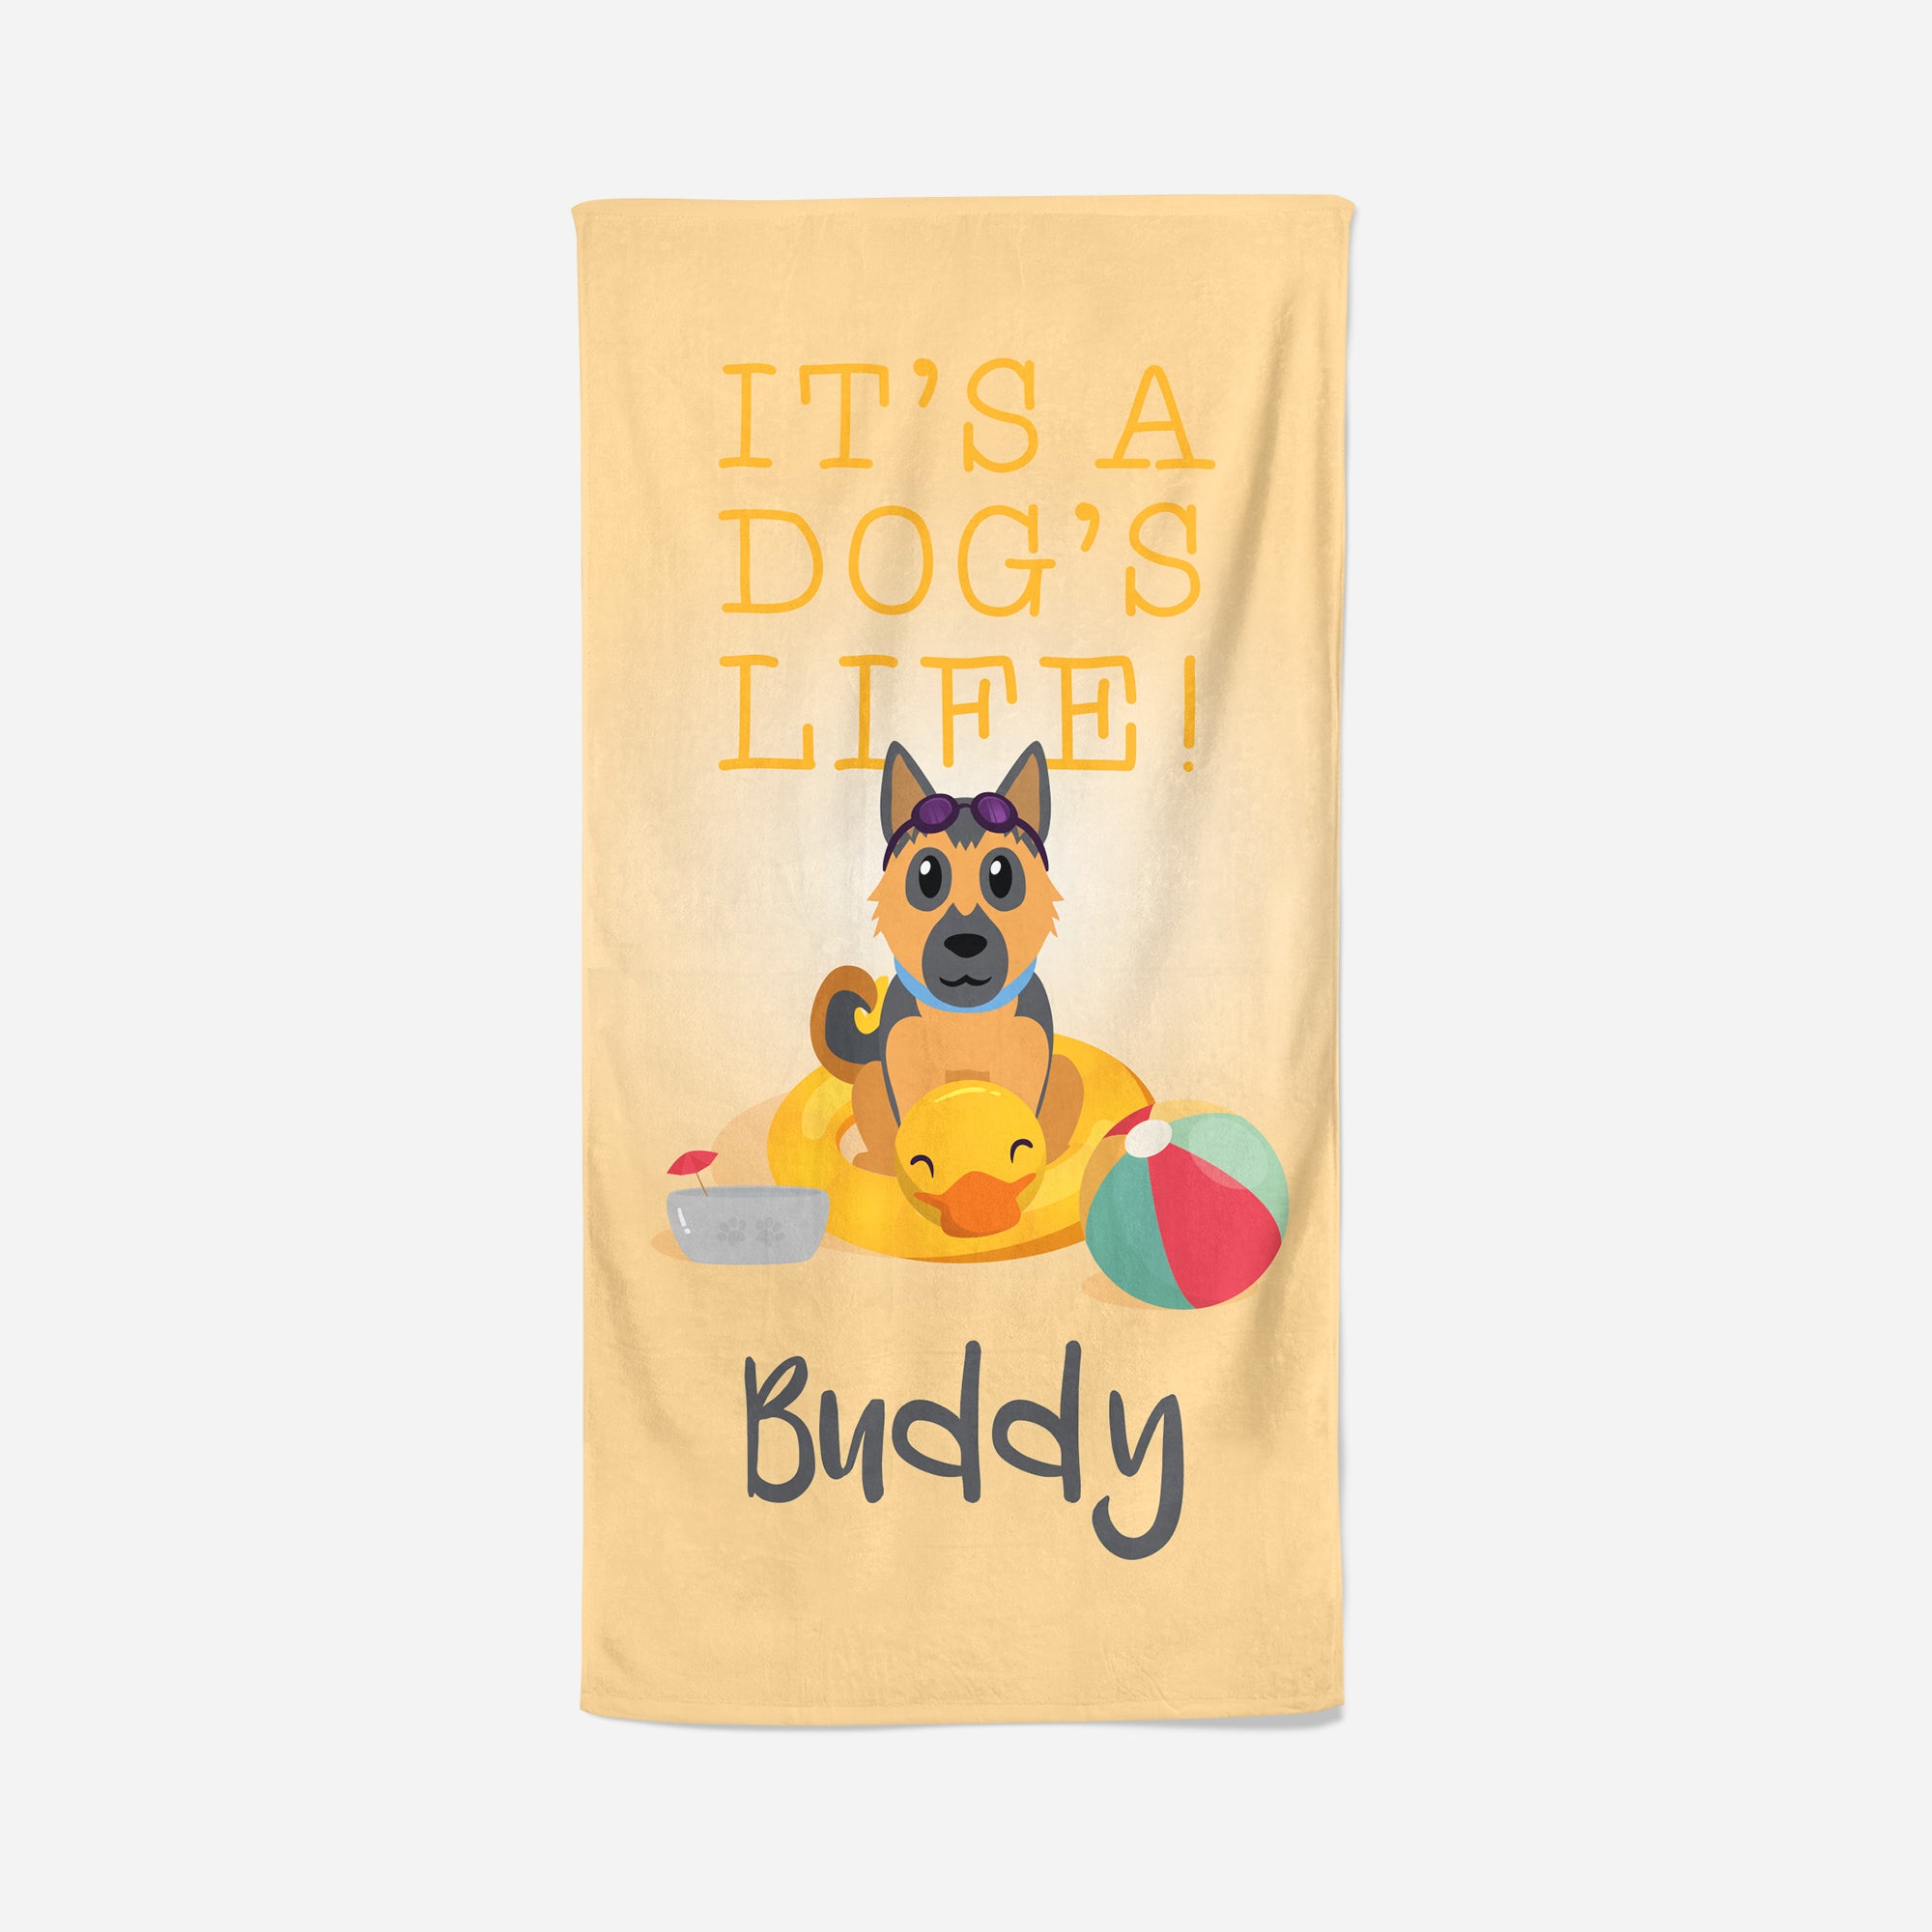 German Shepherd Dog Towel Yellow - Its a Dogs life - Personalise with Name